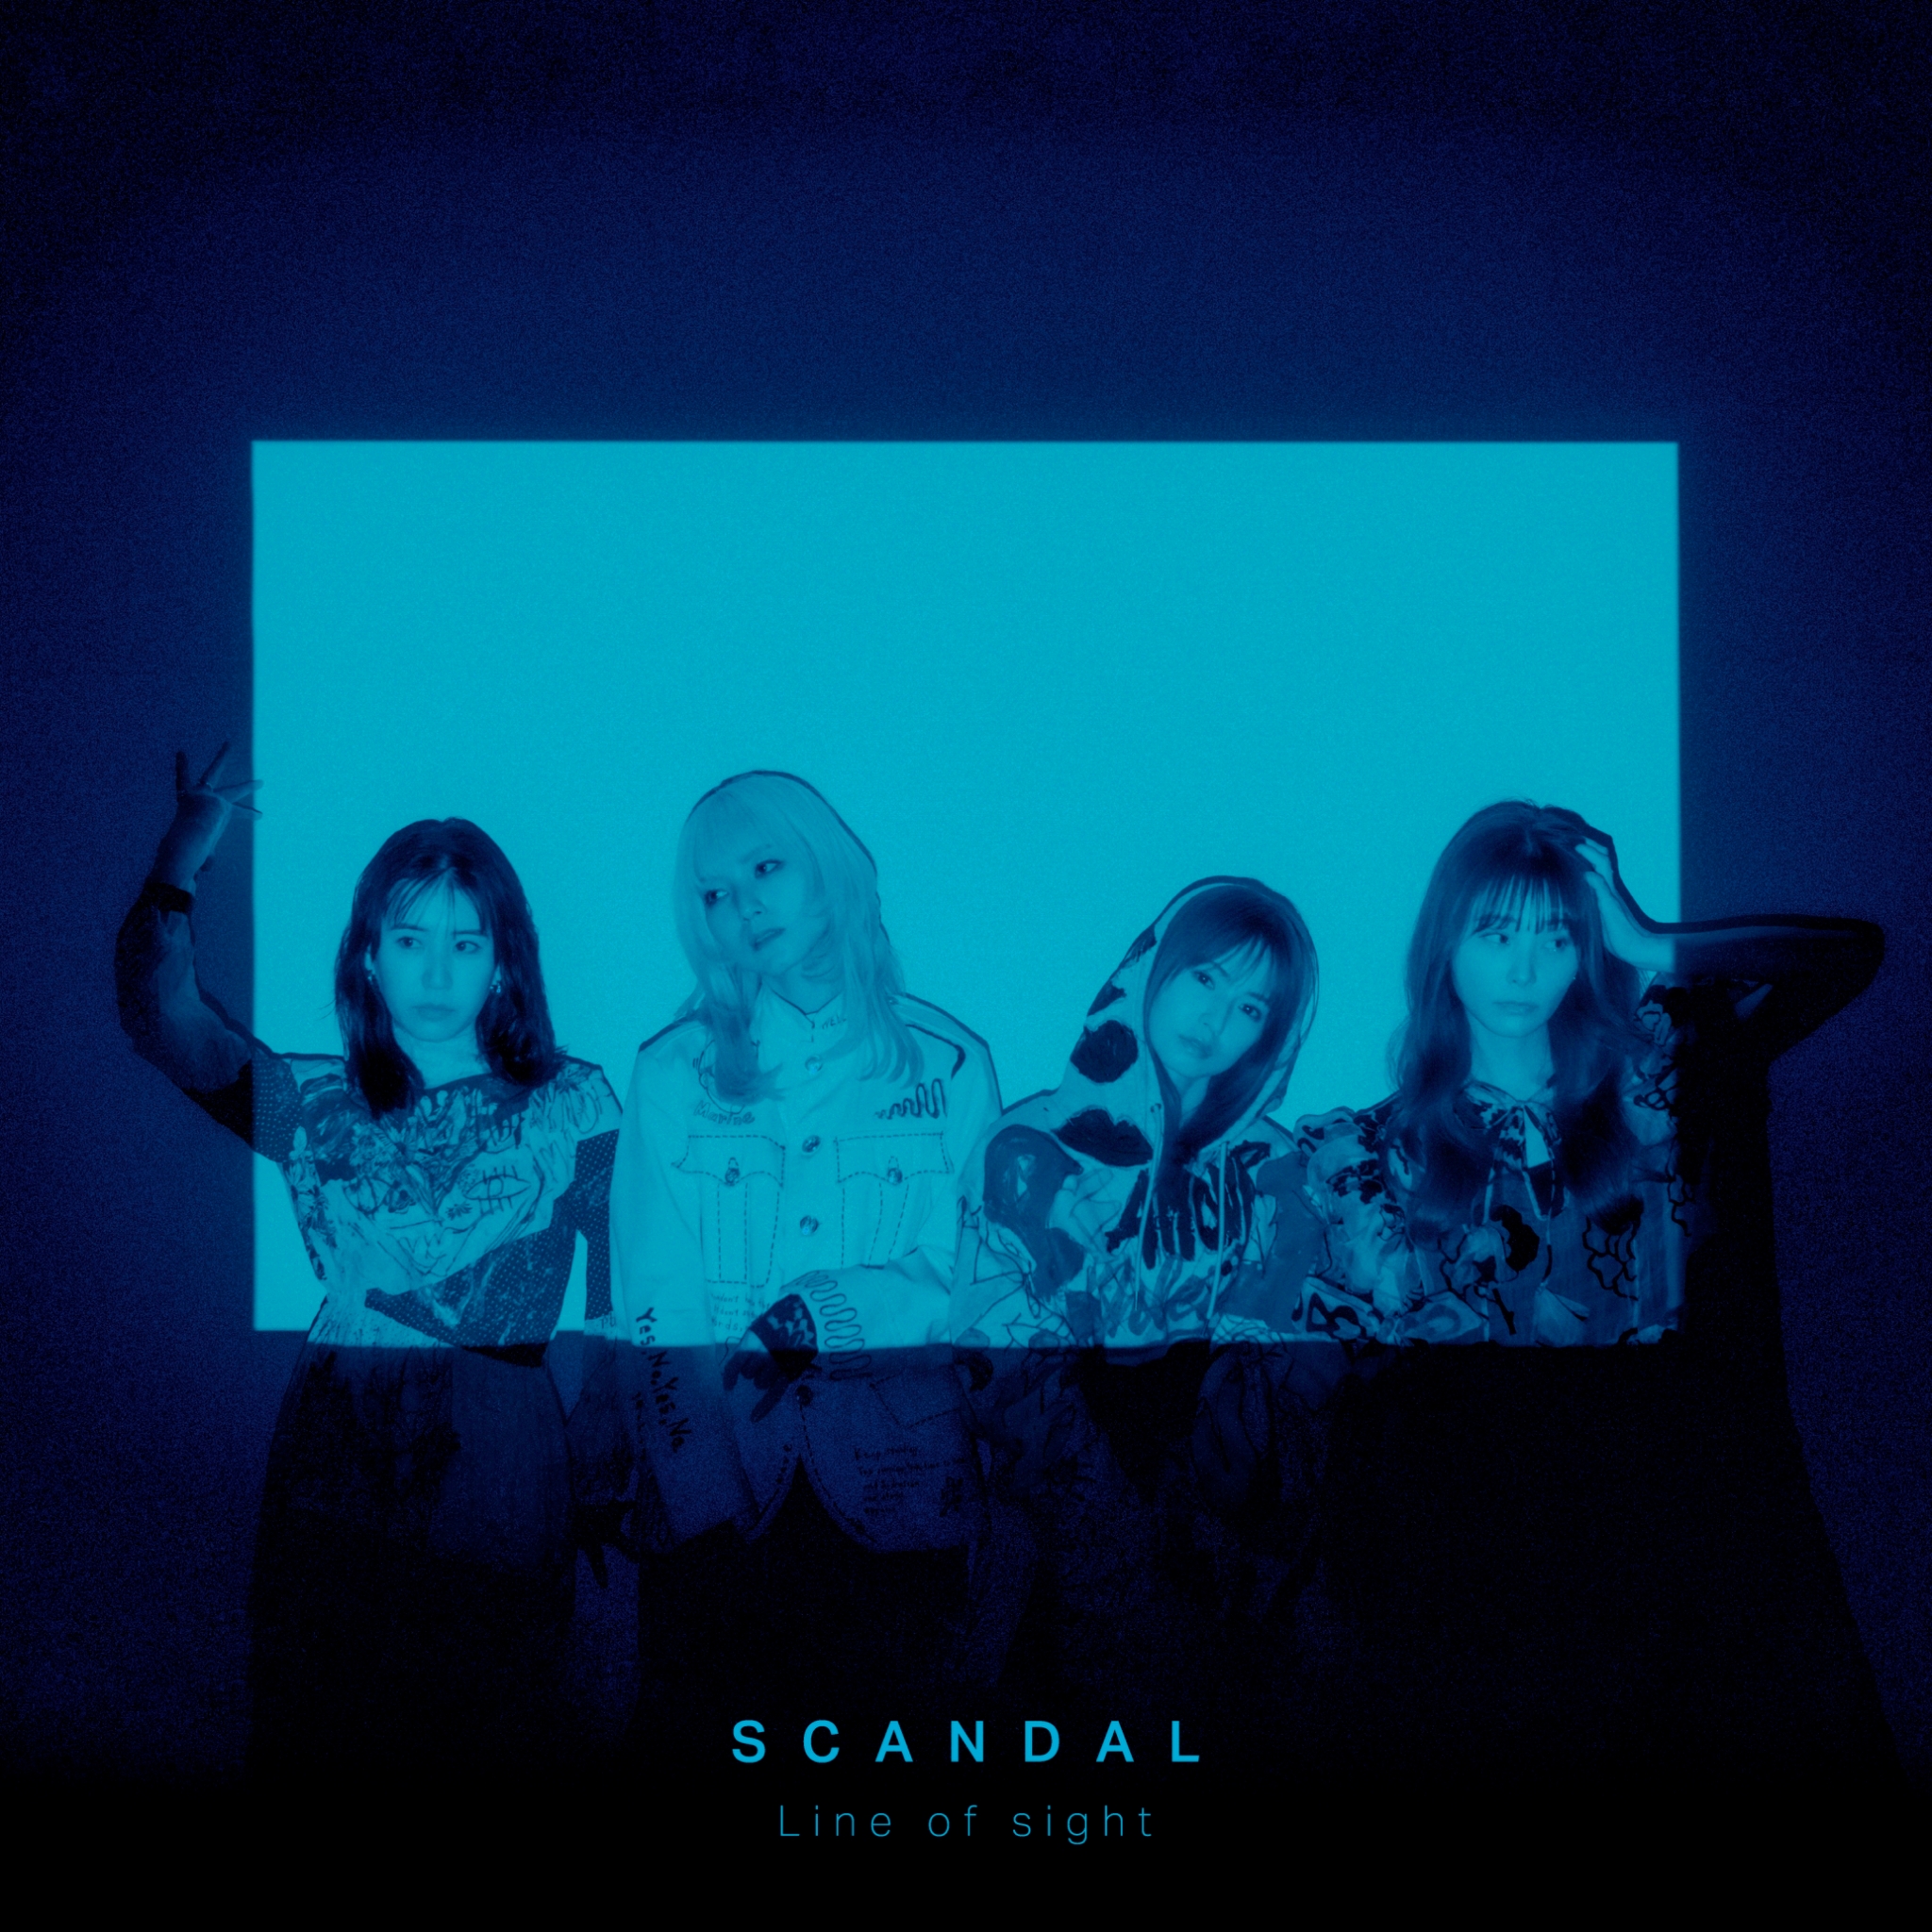 Topics tagged under lineofsight on SCANDAL HEAVEN LINE-ALBUM-230315-0